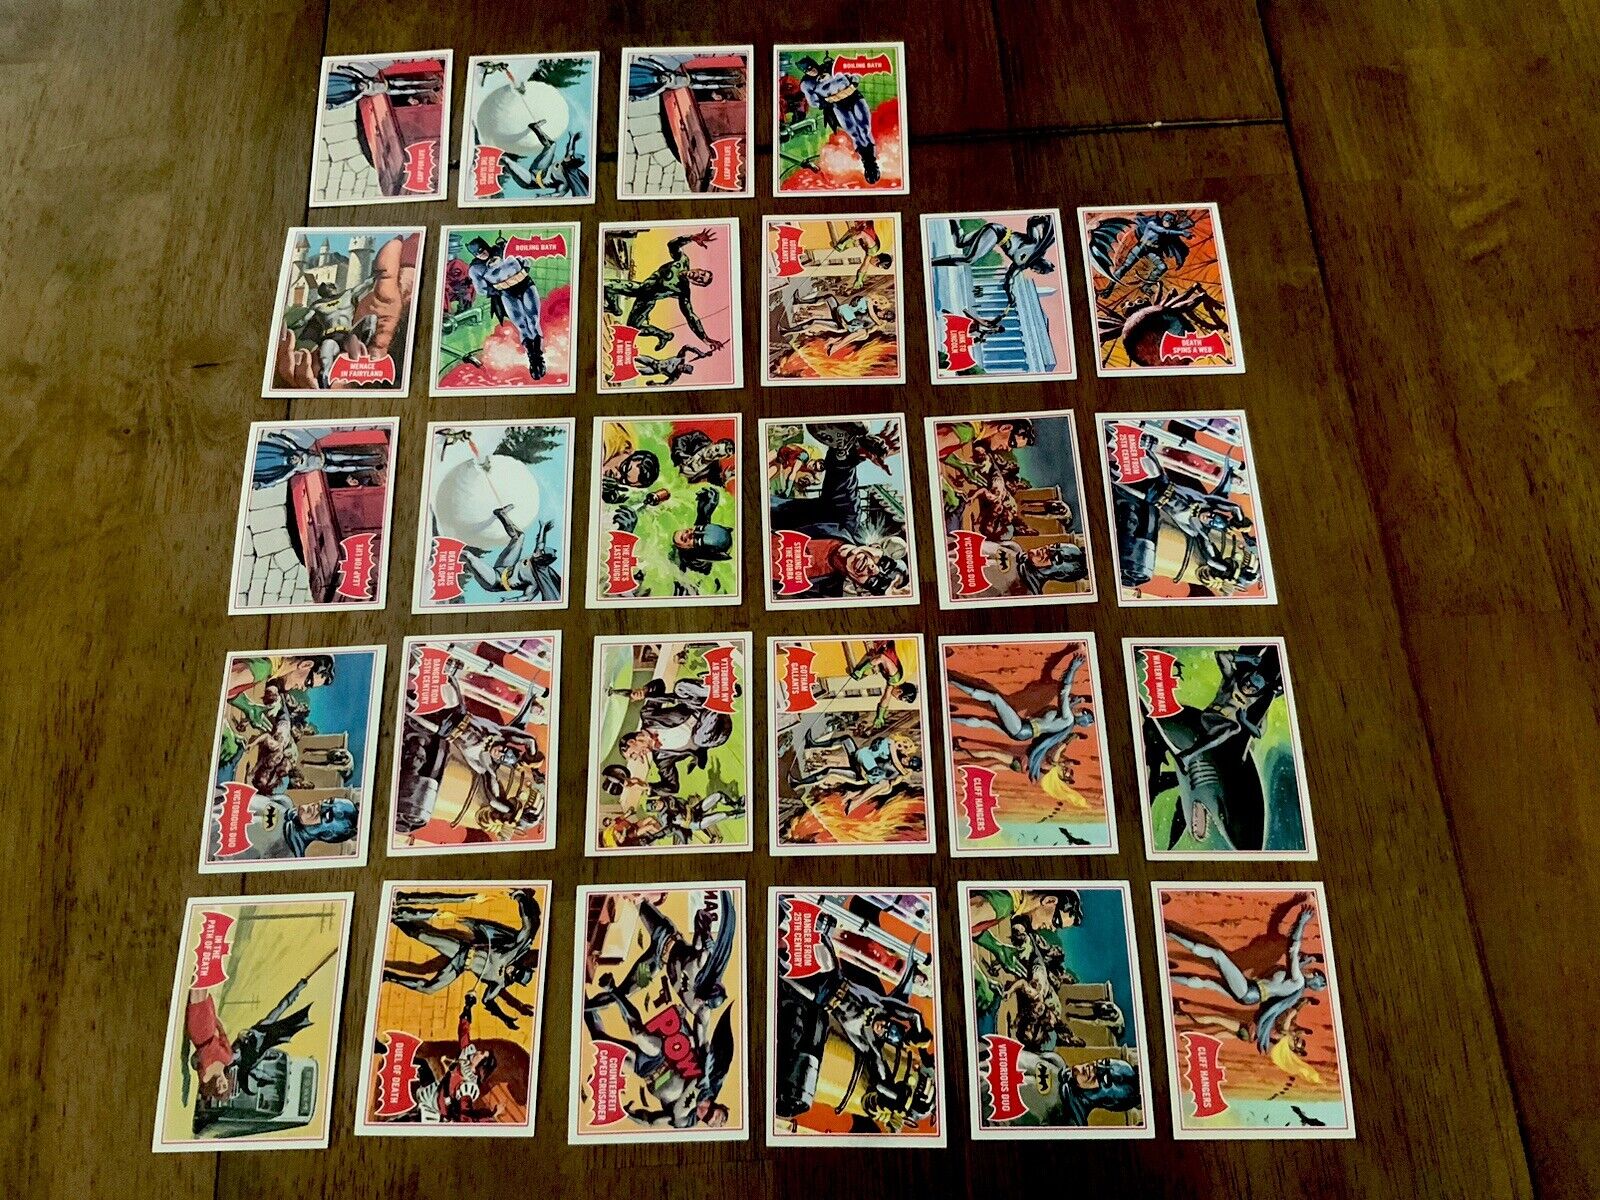 1966 Topps Batman Red Bat Card Lot Of 28 Cards - Very Nice Condition